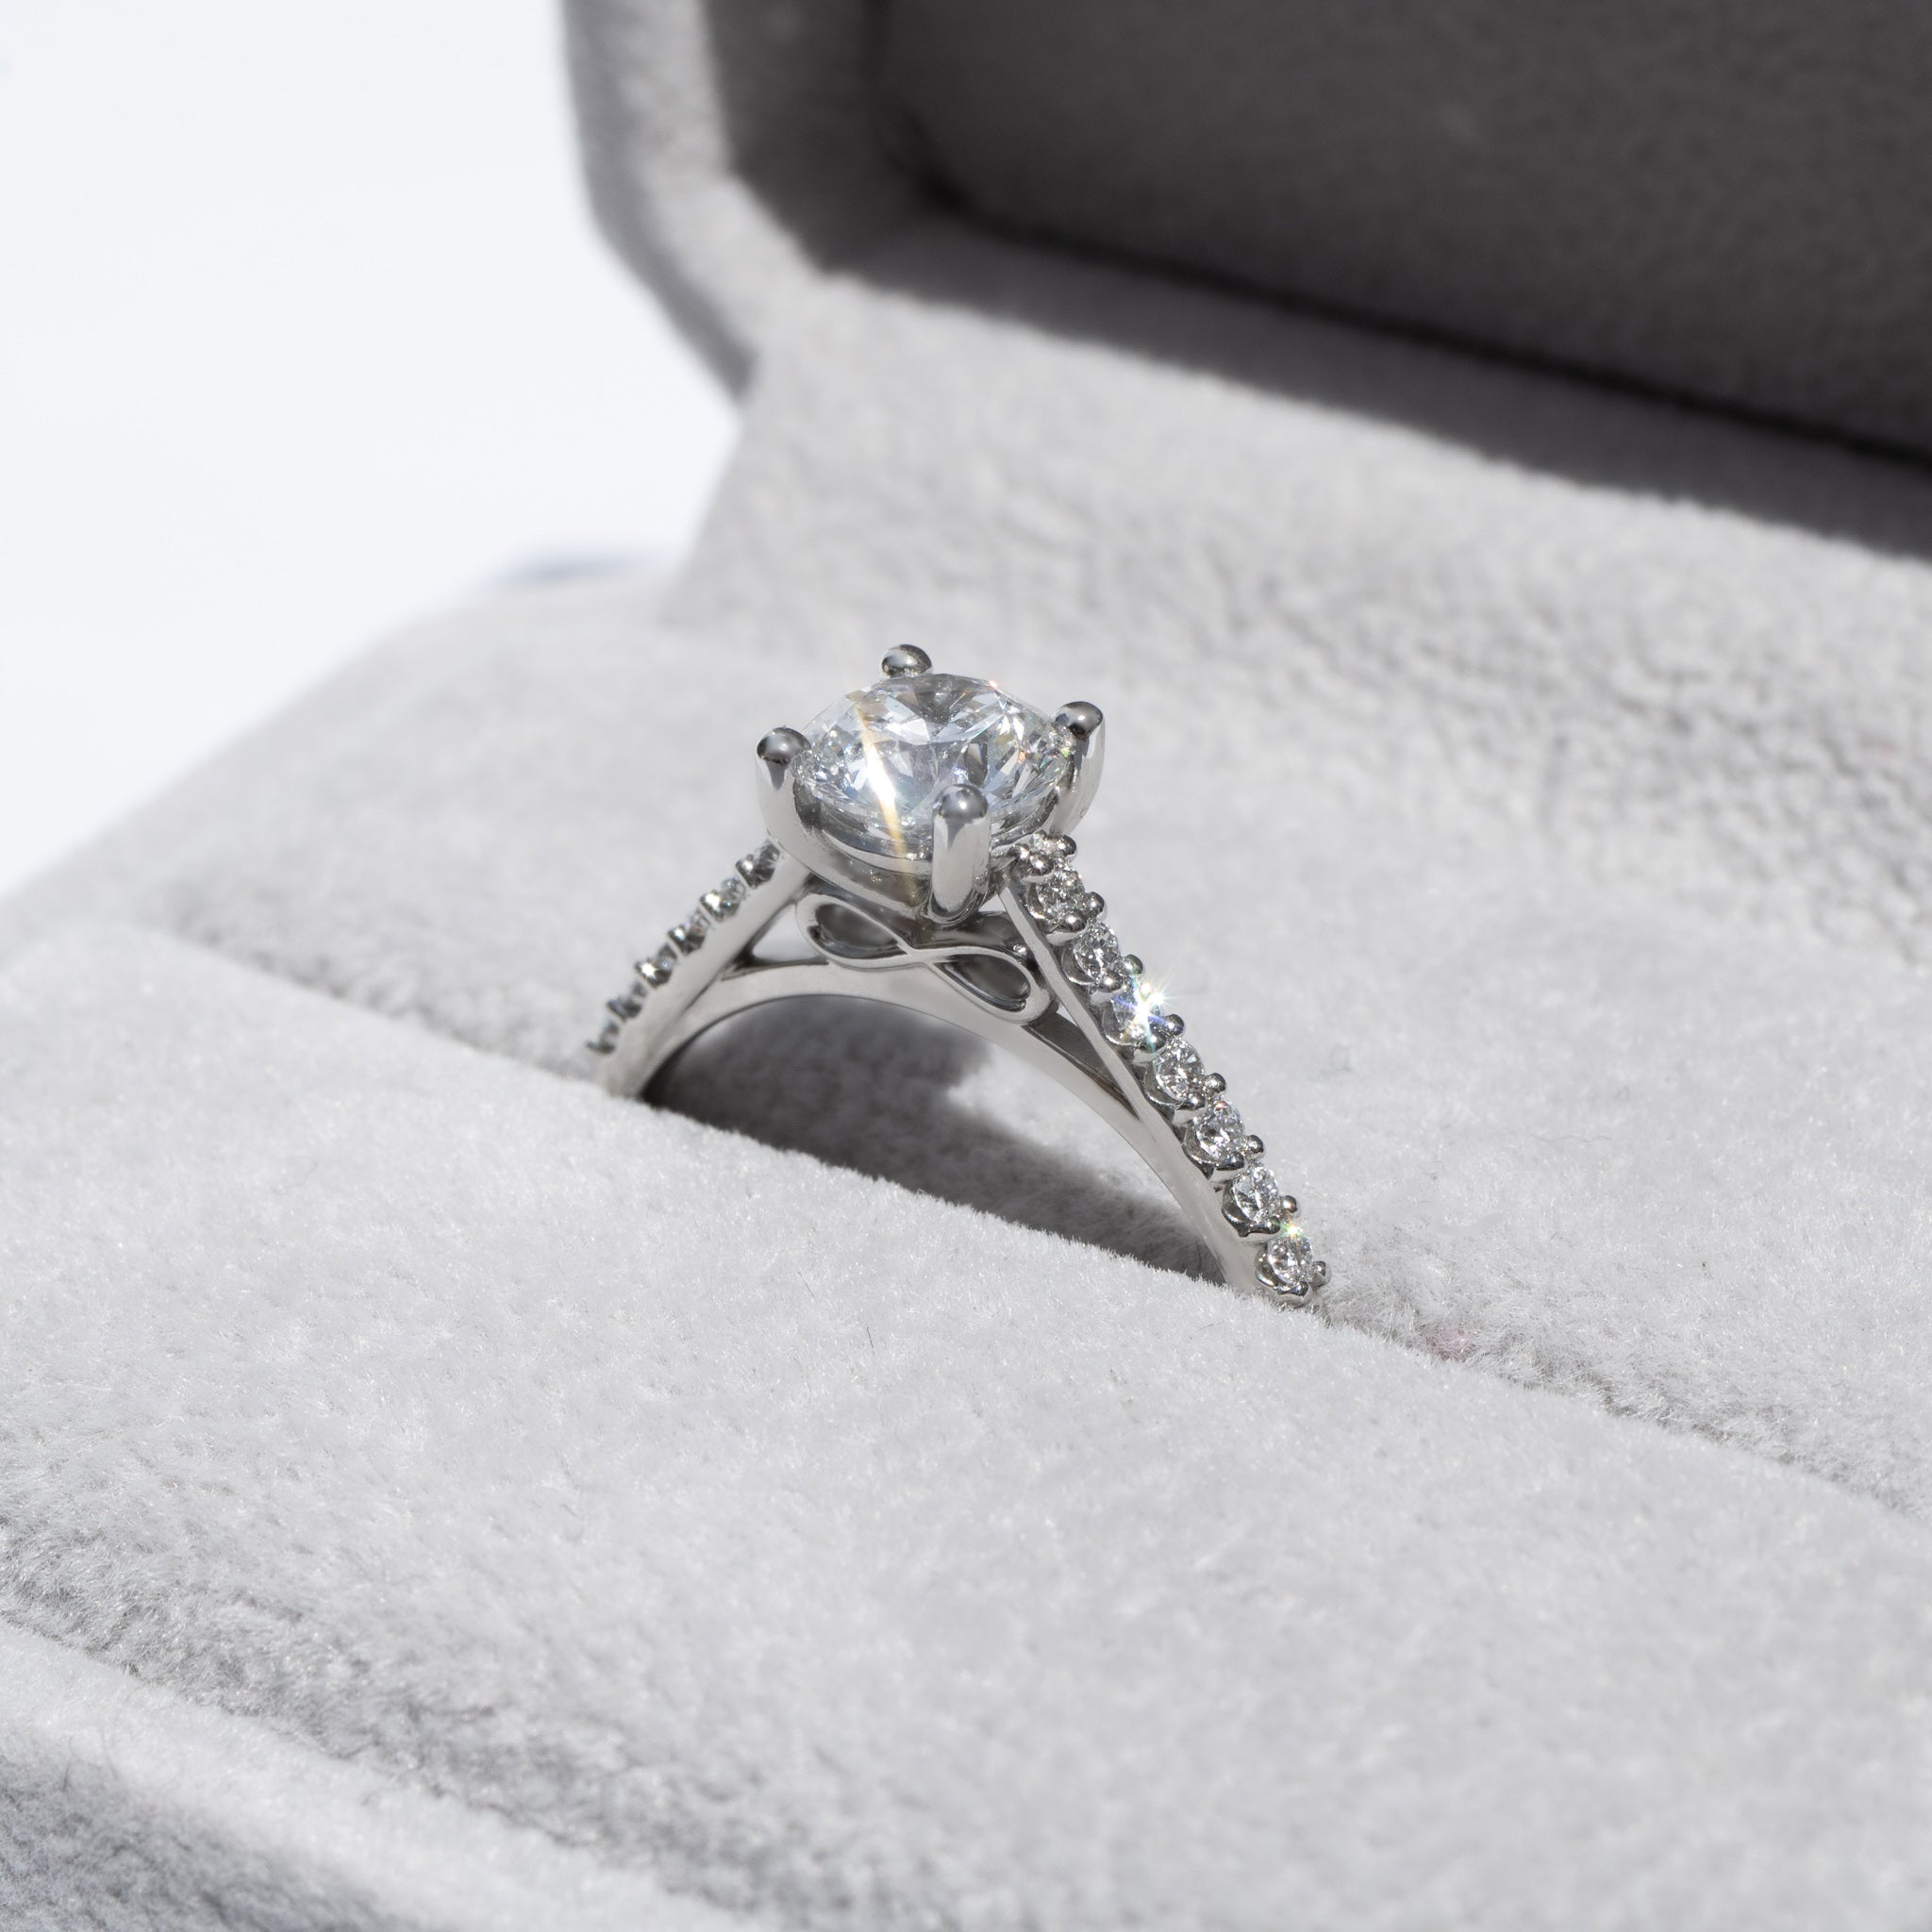 Bespoke Diamond Engagement Ring with Infinity Symbol and Diamond Shoulders